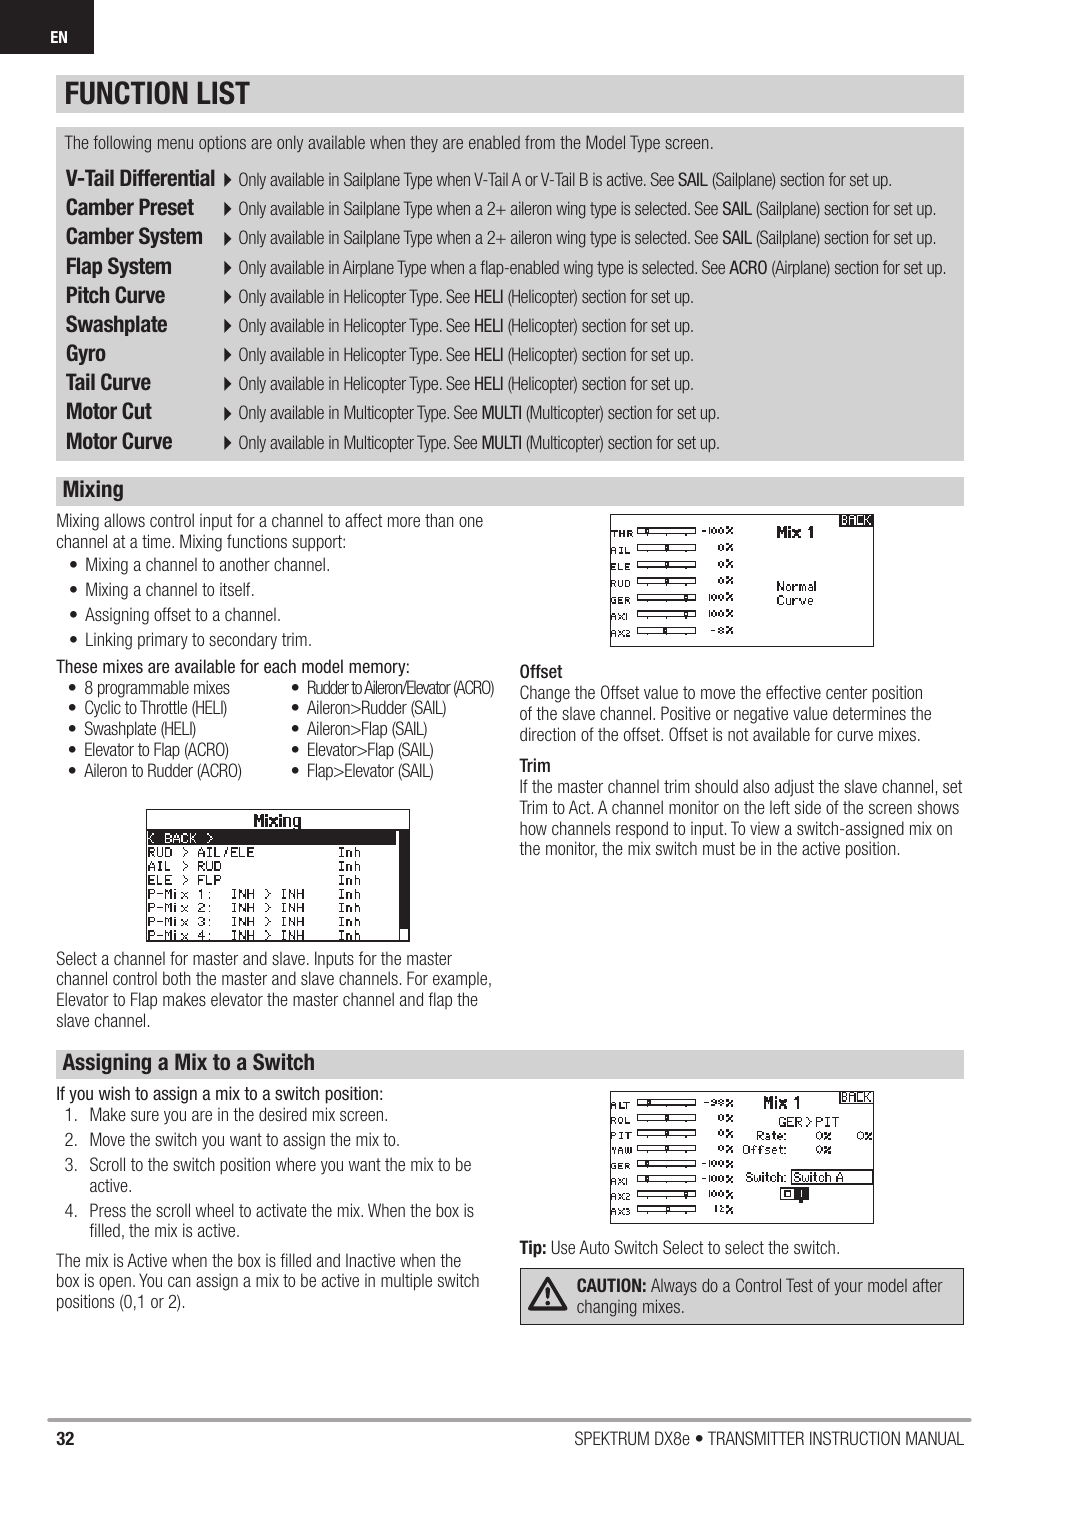 32 SPEKTRUM DX8e • TRANSMITTER INSTRUCTION MANUALENV-Tail Differential 4Only available in Sailplane Type when V-Tail A or V-Tail B is active. See SAIL (Sailplane) section for set up.Camber Preset  4Only available in Sailplane Type when a 2+ aileron wing type is selected. See SAIL (Sailplane) section for set up.Camber System  4Only available in Sailplane Type when a 2+ aileron wing type is selected. See SAIL (Sailplane) section for set up.Flap System  4Only available in Airplane Type when a ﬂ ap-enabled wing type is selected. See ACRO (Airplane) section for set up.Pitch Curve  4Only available in Helicopter Type. See HELI (Helicopter) section for set up.Swashplate  4Only available in Helicopter Type. See HELI (Helicopter) section for set up.Gyro  4Only available in Helicopter Type. See HELI (Helicopter) section for set up.Tail Curve  4Only available in Helicopter Type. See HELI (Helicopter) section for set up.Motor Cut  4Only available in Multicopter Type. See MULTI (Multicopter) section for set up. Motor Curve  4Only available in Multicopter Type. See MULTI (Multicopter) section for set up. The following menu options are only available when they are enabled from the Model Type screen.Mixing allows control input for a channel to affect more than one channel at a time. Mixing functions support: •  Mixing a channel to another channel.•  Mixing a channel to itself. •  Assigning offset to a channel. •  Linking primary to secondary trim. These mixes are available for each model memory:Select a channel for master and slave. Inputs for the master channel control both the master and slave channels. For example, Elevator to Flap makes elevator the master channel and ﬂ ap the slave channel. OffsetChange the Offset value to move the effective center position of the slave channel. Positive or negative value determines the direction of the offset. Offset is not available for curve mixes.TrimIf the master channel trim should also adjust the slave channel, set Trim to Act. A channel monitor on the left side of the screen shows how channels respond to input. To view a switch-assigned mix on the monitor, the mix switch must be in the active position.•  8 programmable mixes •  Cyclic to Throttle (HELI)• Swashplate (HELI) •  Elevator to Flap (ACRO)•  Aileron to Rudder (ACRO)•  Rudder to Aileron/Elevator (ACRO) • Aileron&gt;Rudder (SAIL) • Aileron&gt;Flap (SAIL)• Elevator&gt;Flap (SAIL)• Flap&gt;Elevator (SAIL)If you wish to assign a mix to a switch position:1.  Make sure you are in the desired mix screen.2.  Move the switch you want to assign the mix to.3.  Scroll to the switch position where you want the mix to be active.4.  Press the scroll wheel to activate the mix. When the box is ﬁ lled, the mix is active.The mix is Active when the box is ﬁ lled and Inactive when the box is open. You can assign a mix to be active in multiple switch positions (0,1 or 2).Tip: Use Auto Switch Select to select the switch.CAUTION: Always do a Control Test of your model after changing mixes. FUNCTION LISTMixingAssigning a Mix to a Switch